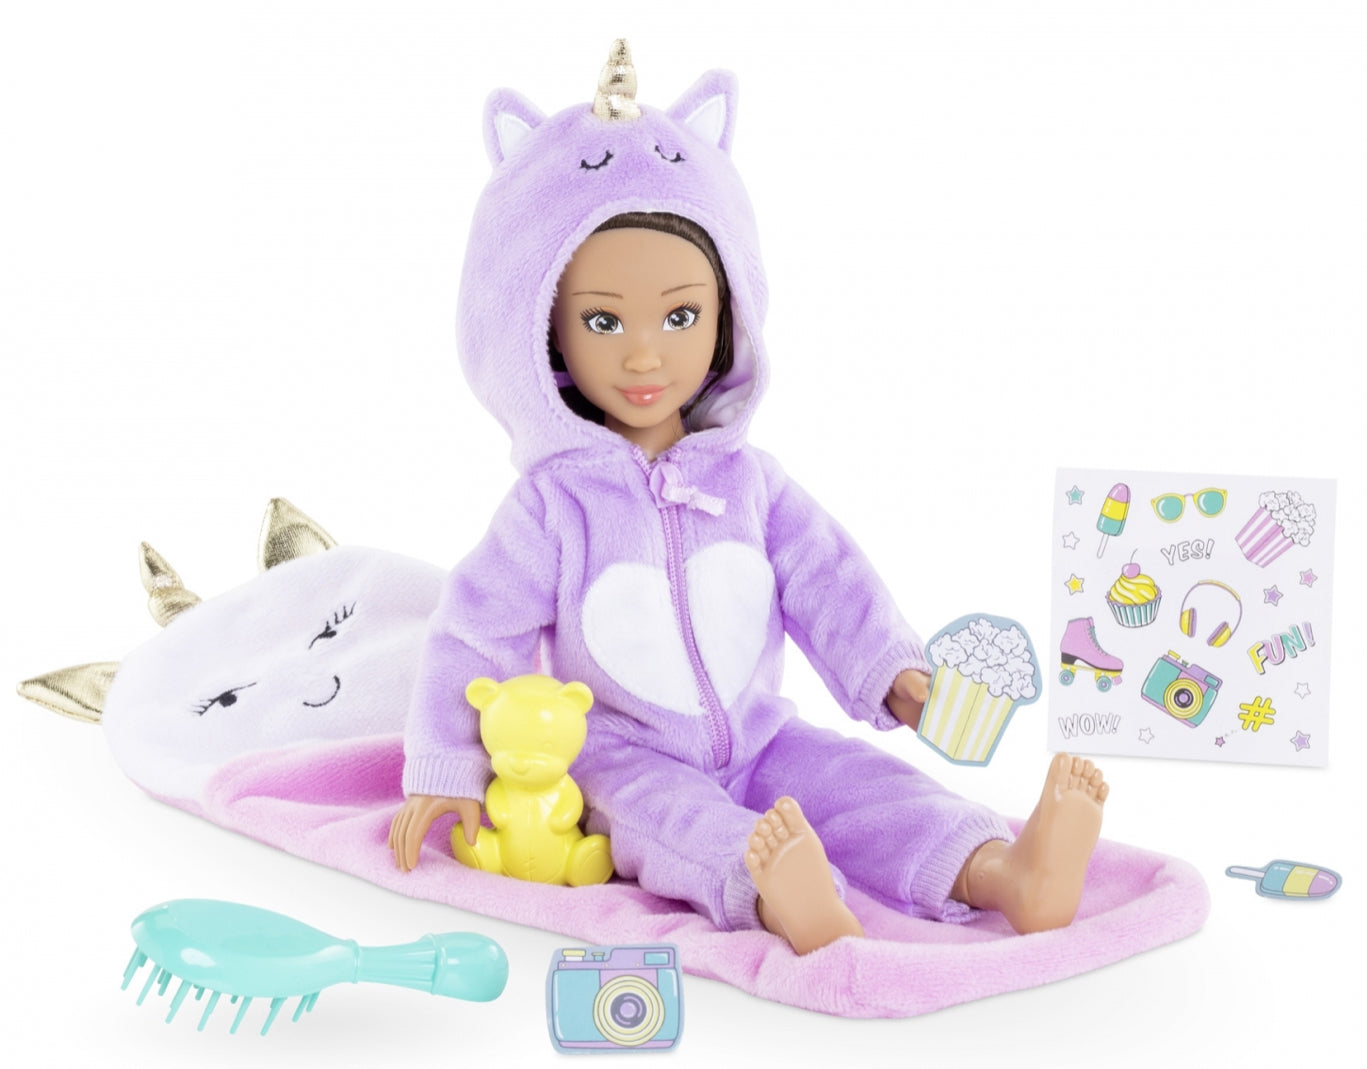 Corolle Girls Luna Pajama Party Set by Corolle # 600210